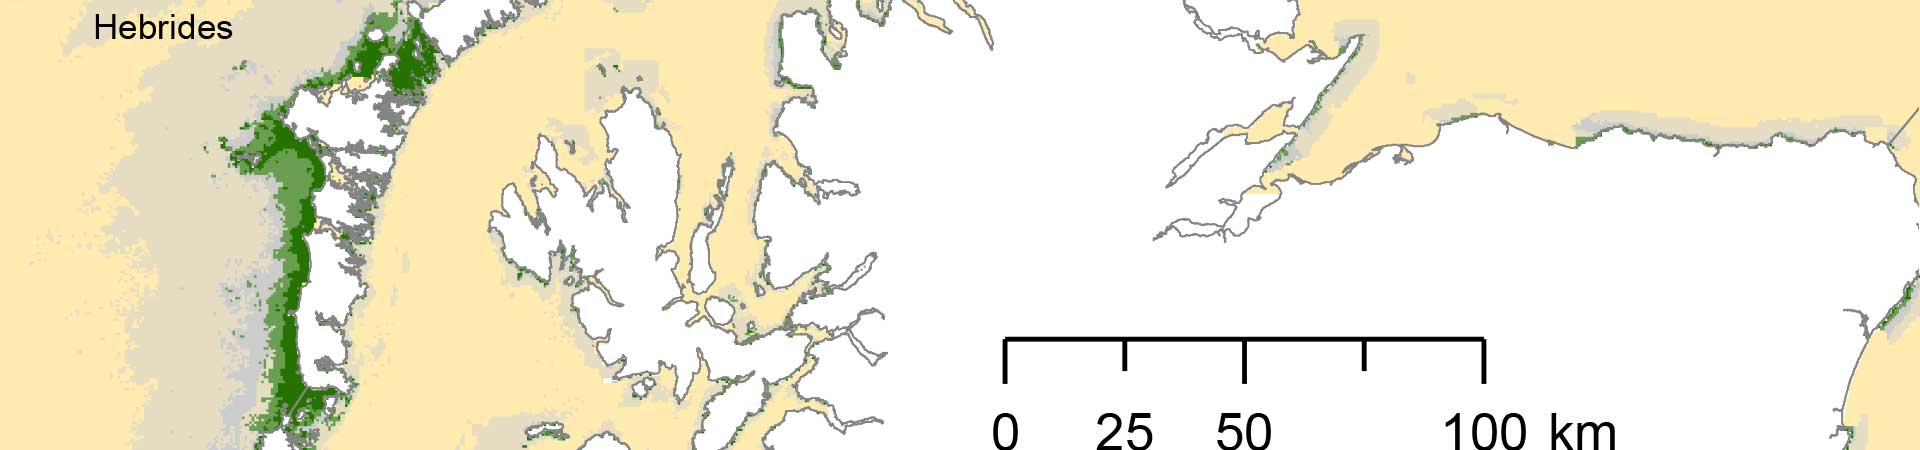 Map showing rates of kelp carbon assimilation around Scotland's coast